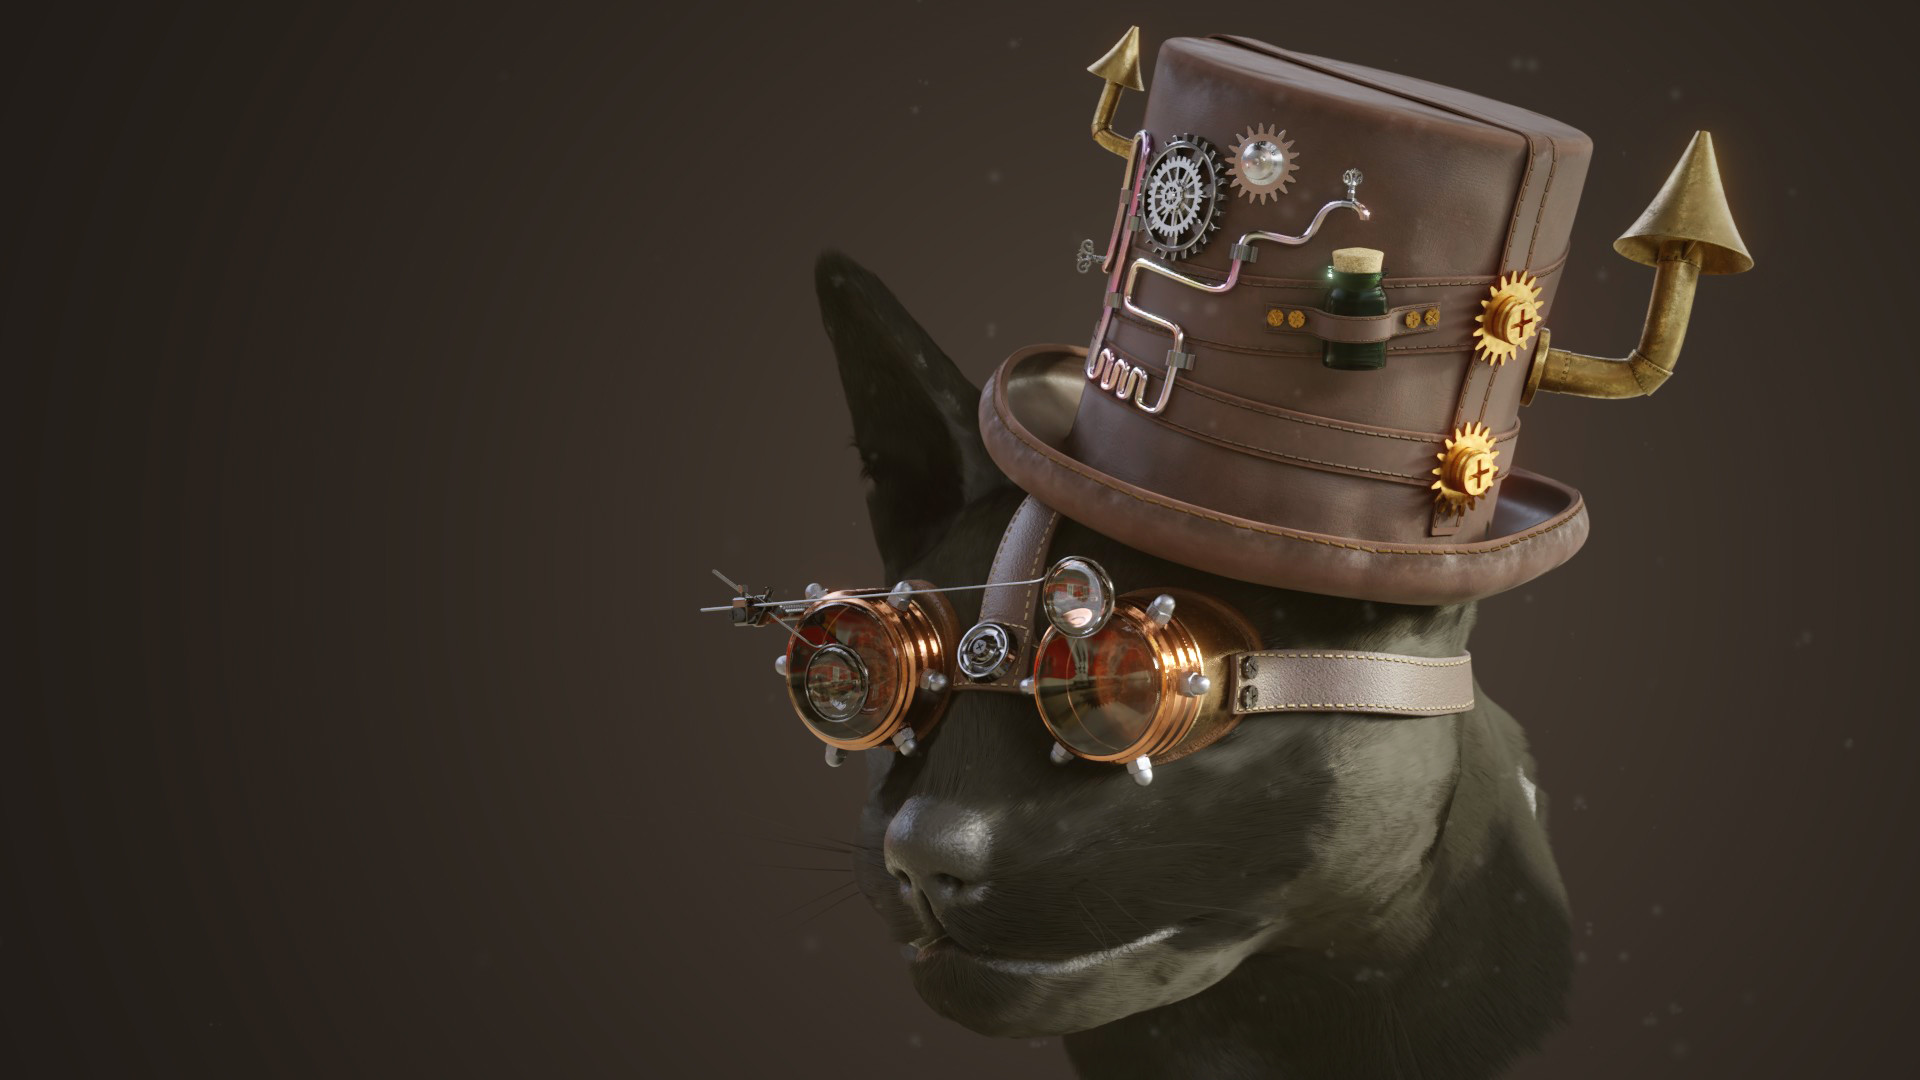 Steampunk Cat Wallpapers